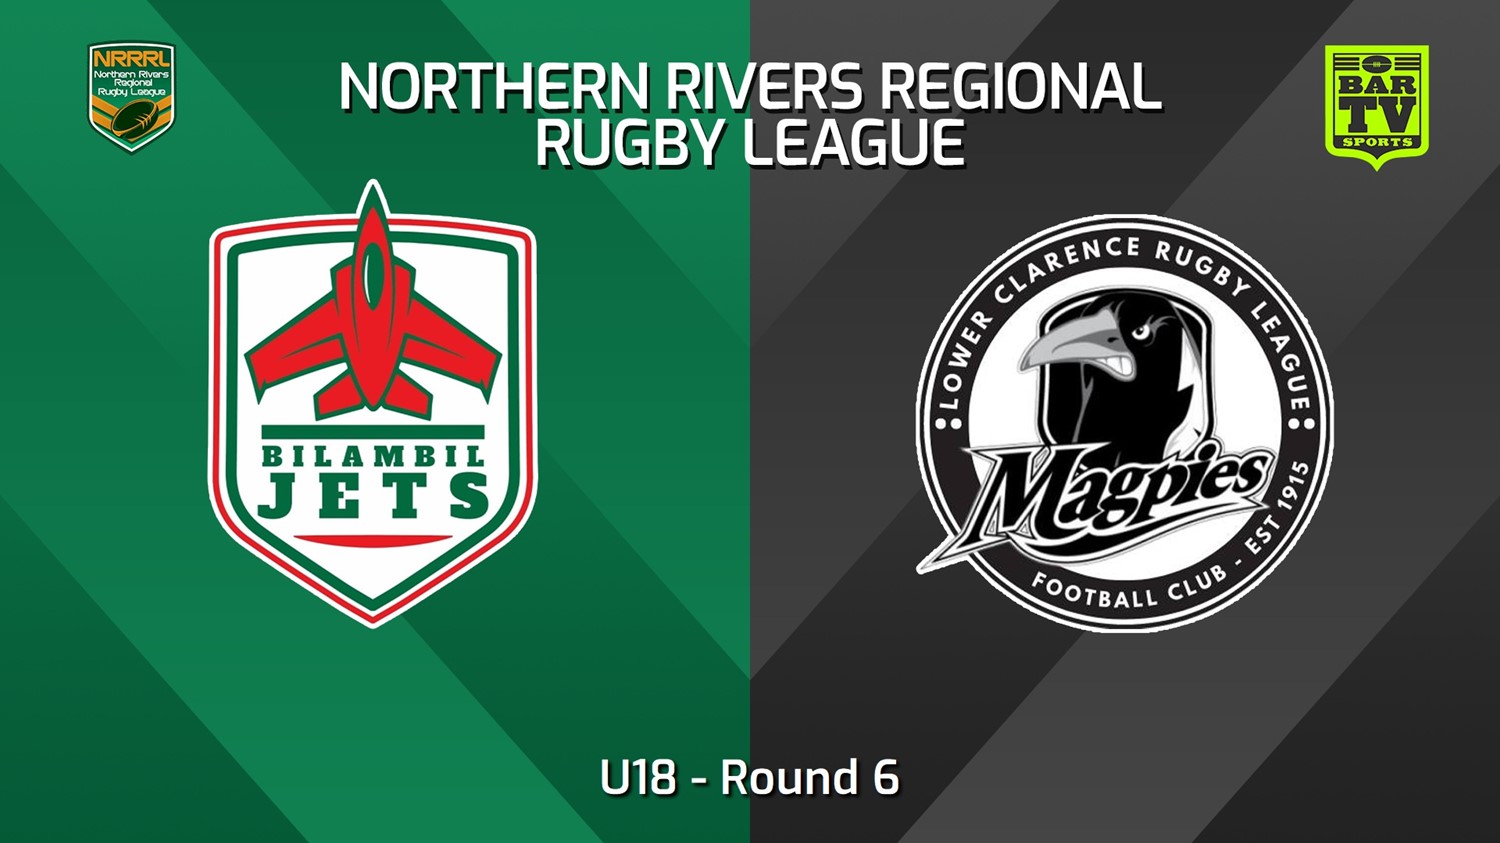 240609-video-Northern Rivers Round 6 - U18 - Bilambil Jets v Lower Clarence Magpies Slate Image